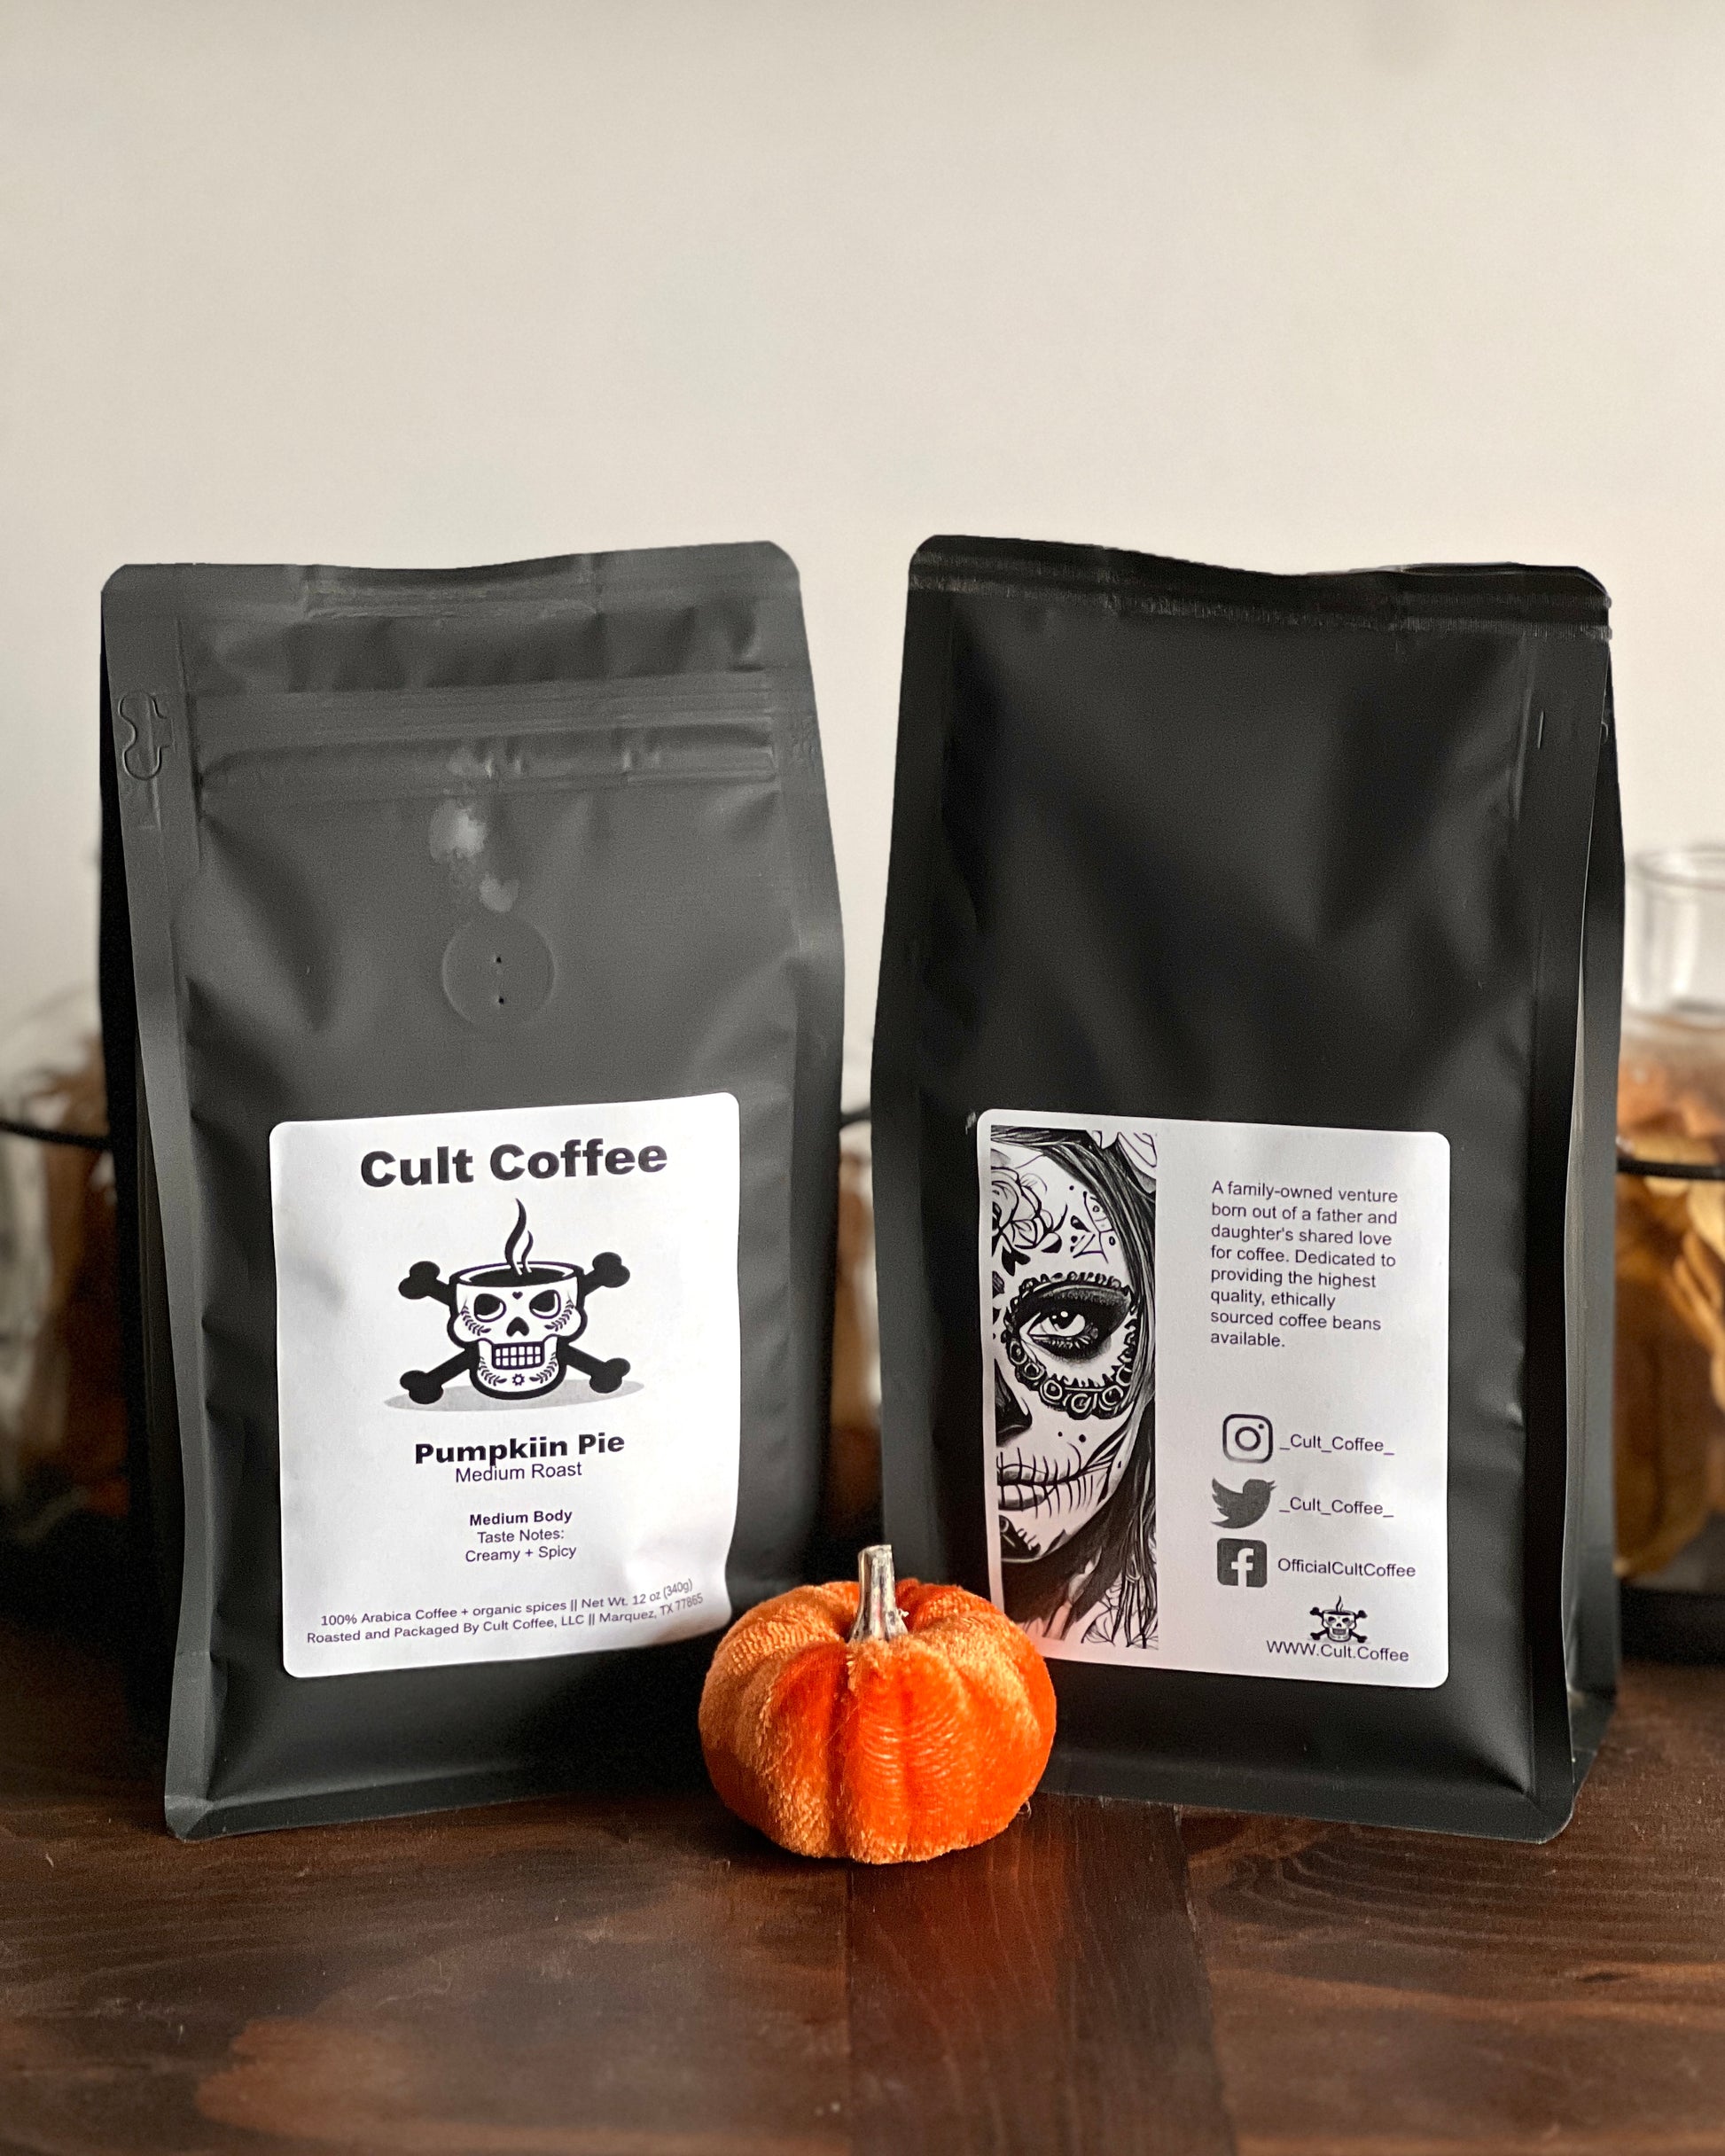 Two bags of Cult Coffee on a wooden counter; the left bag labeled 'Pumpkin Pie Medium Roast' with a skull and chef's hat graphic, and the right bag with a Day of the Dead-style face illustration. A small pumpkin sits in front. The background is minimal with a shelf and jars.